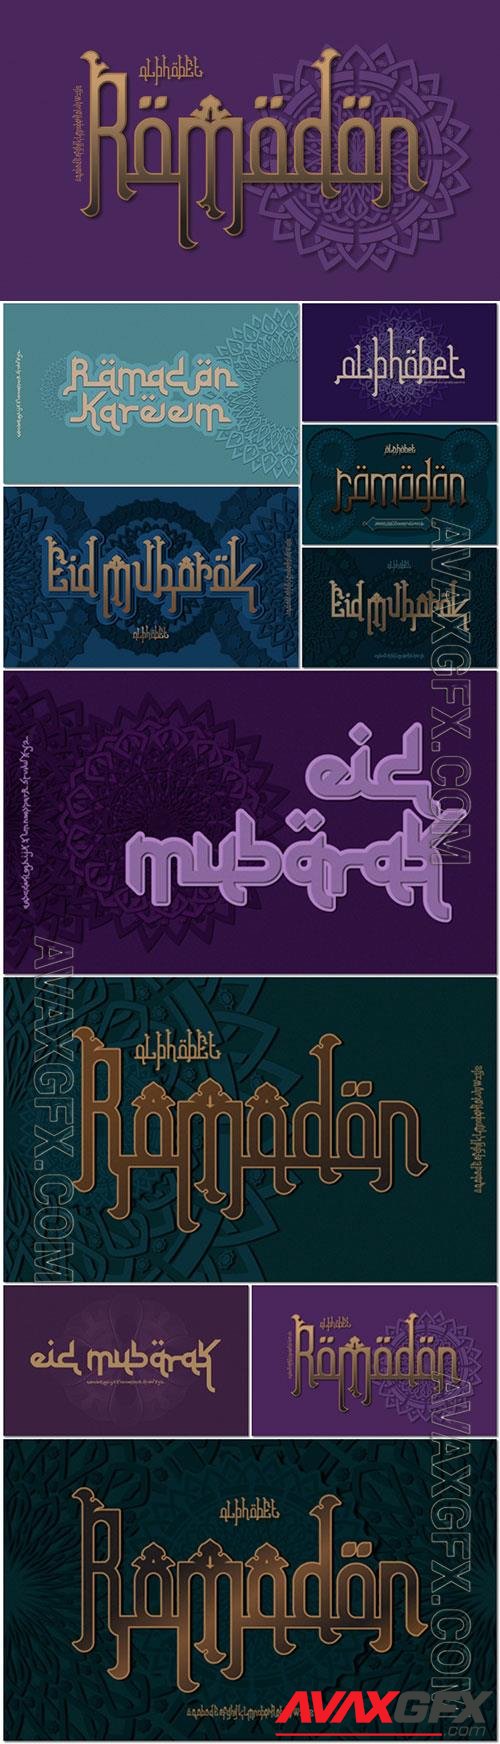 Elegant and luxury font with decorative background for ramadan in vector